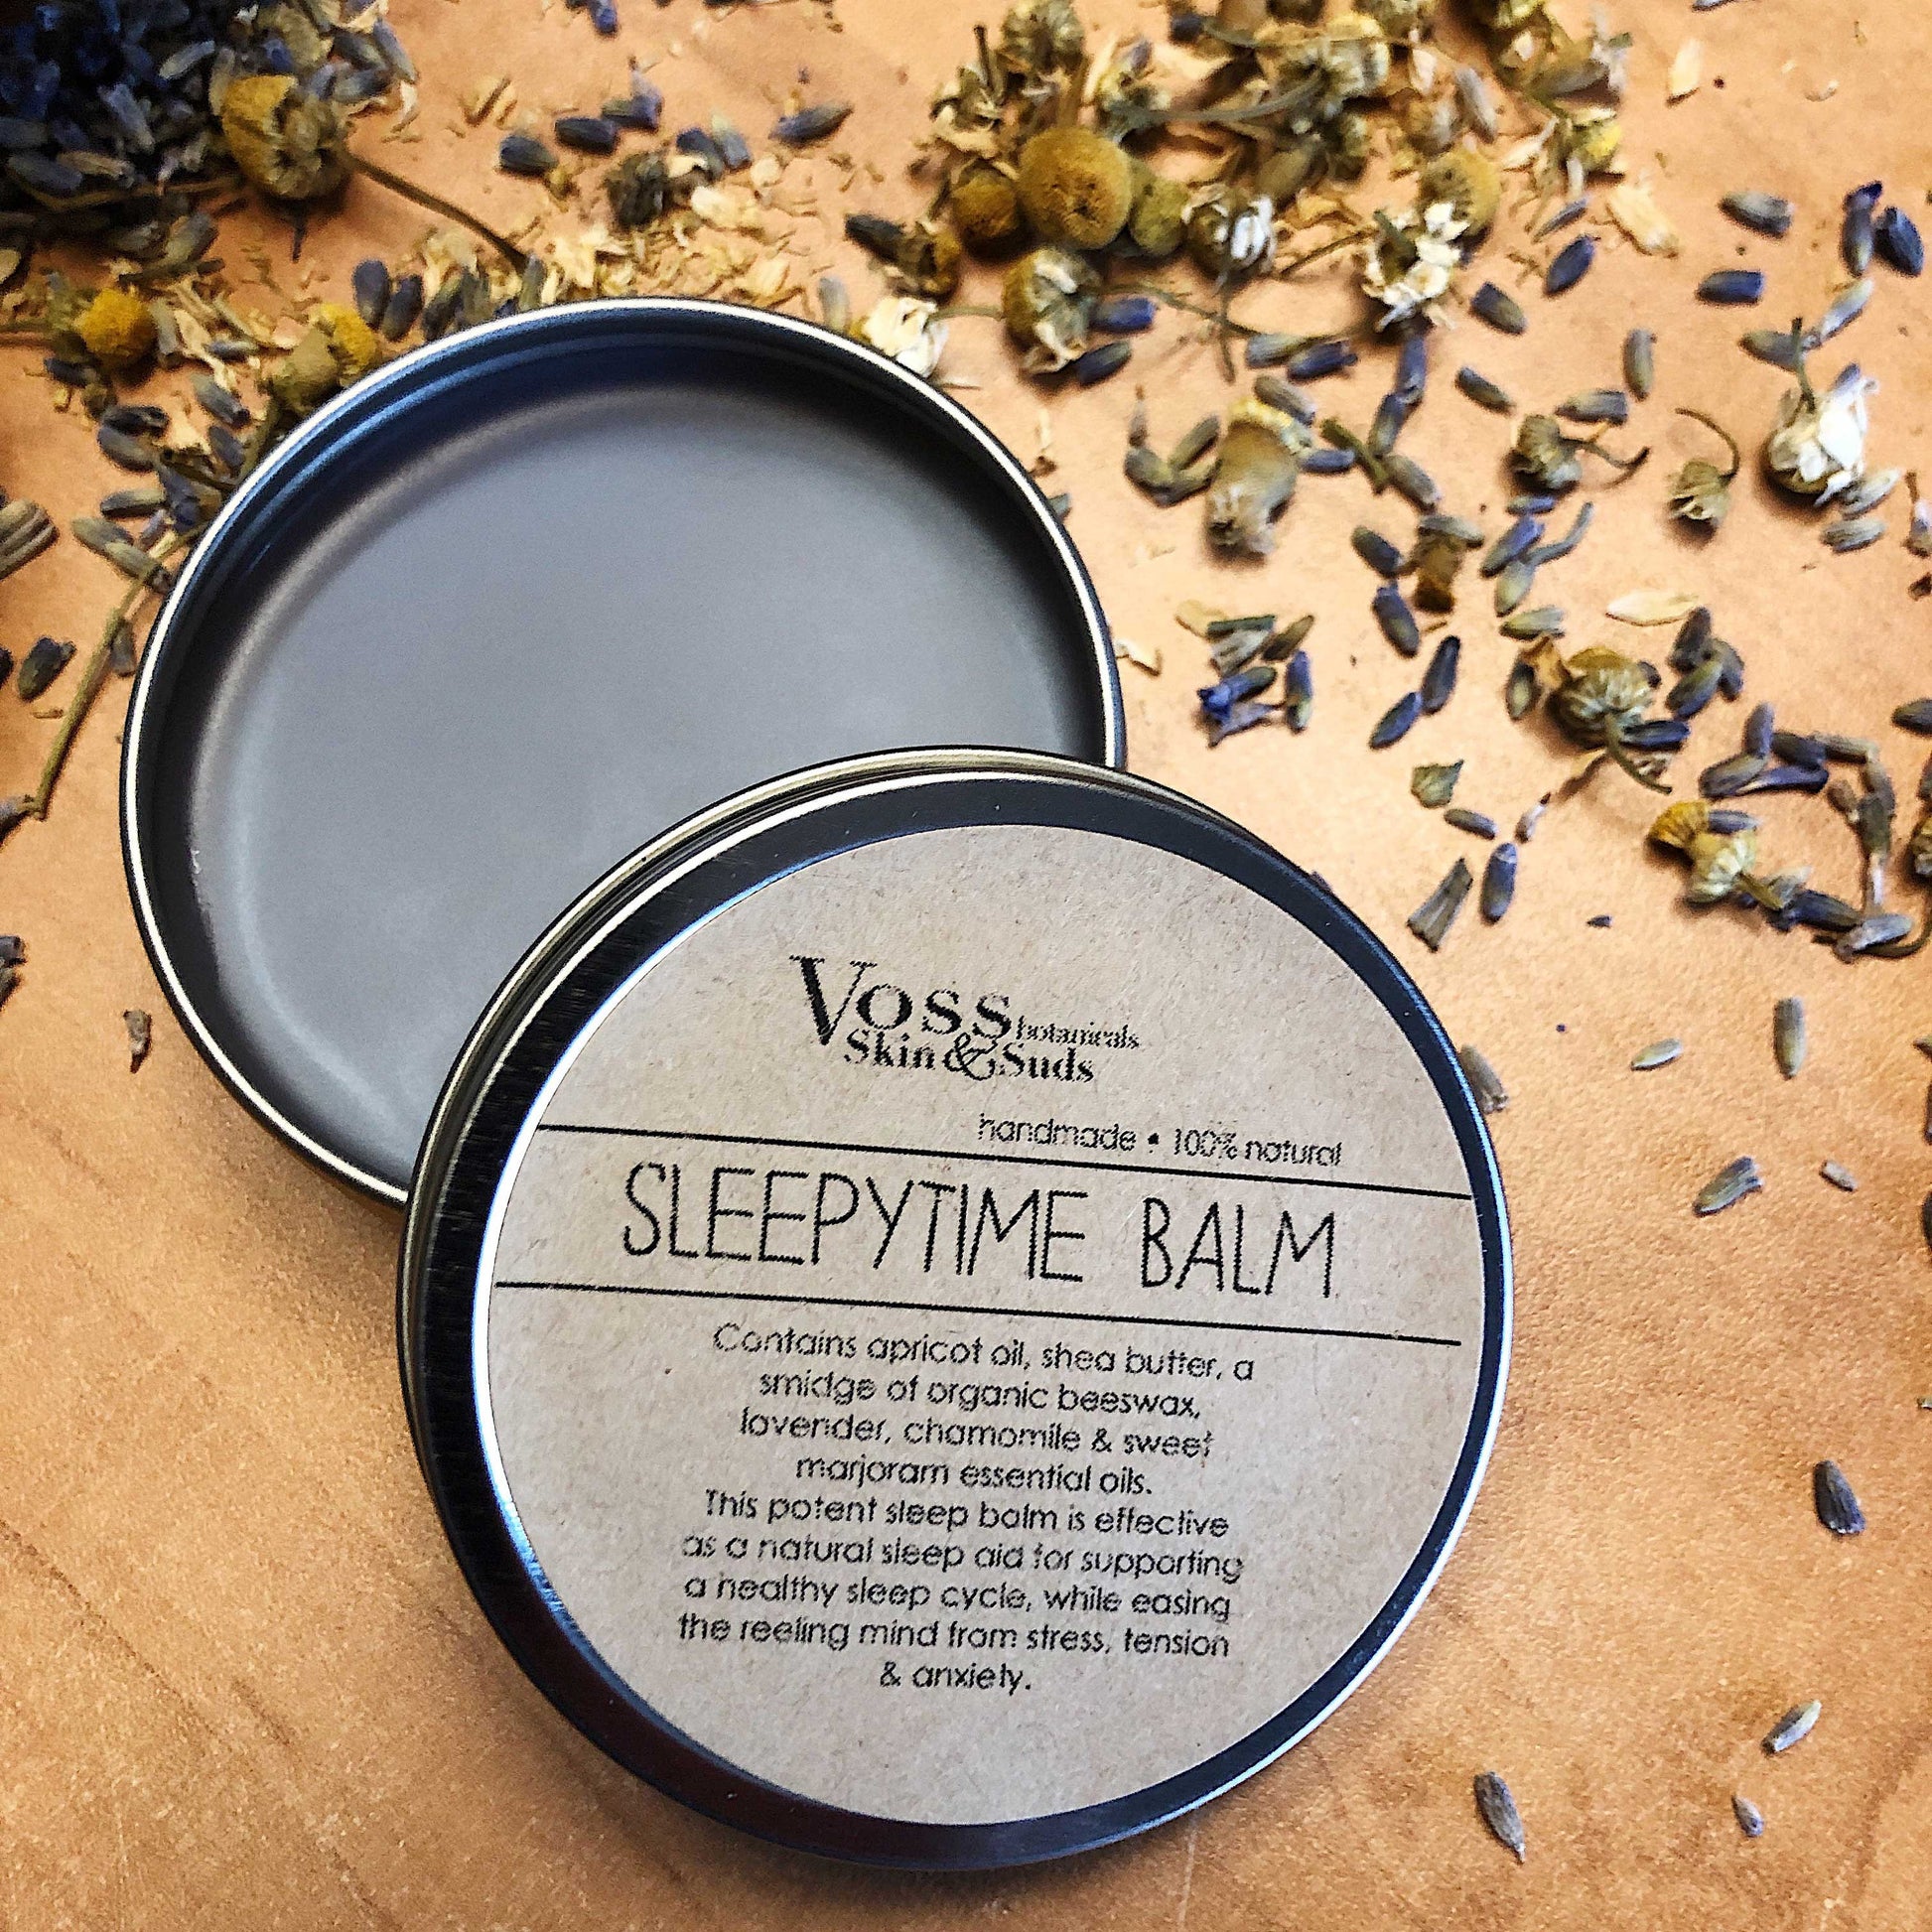 Stress Relief Lavender Sleep Balm PRODUCT FOOTPRINTS Natural ingredients Phthalate, Sulfate, Petroleum & Paraben Free Vegan Free of Synthetic Fragrances Free of Synthetic Dyes GMO & Gluten-free Non Toxic Handmade Sustainable Innovation Made in the USA Cruelty Free Zero Waste Low Carbon Footprint eco friendly   Holiday care package gift box gift for her relaxation gift self care box self care gift box spa gift box spa gift set thank you gift box birthday gift new mom gift relaxing bath set